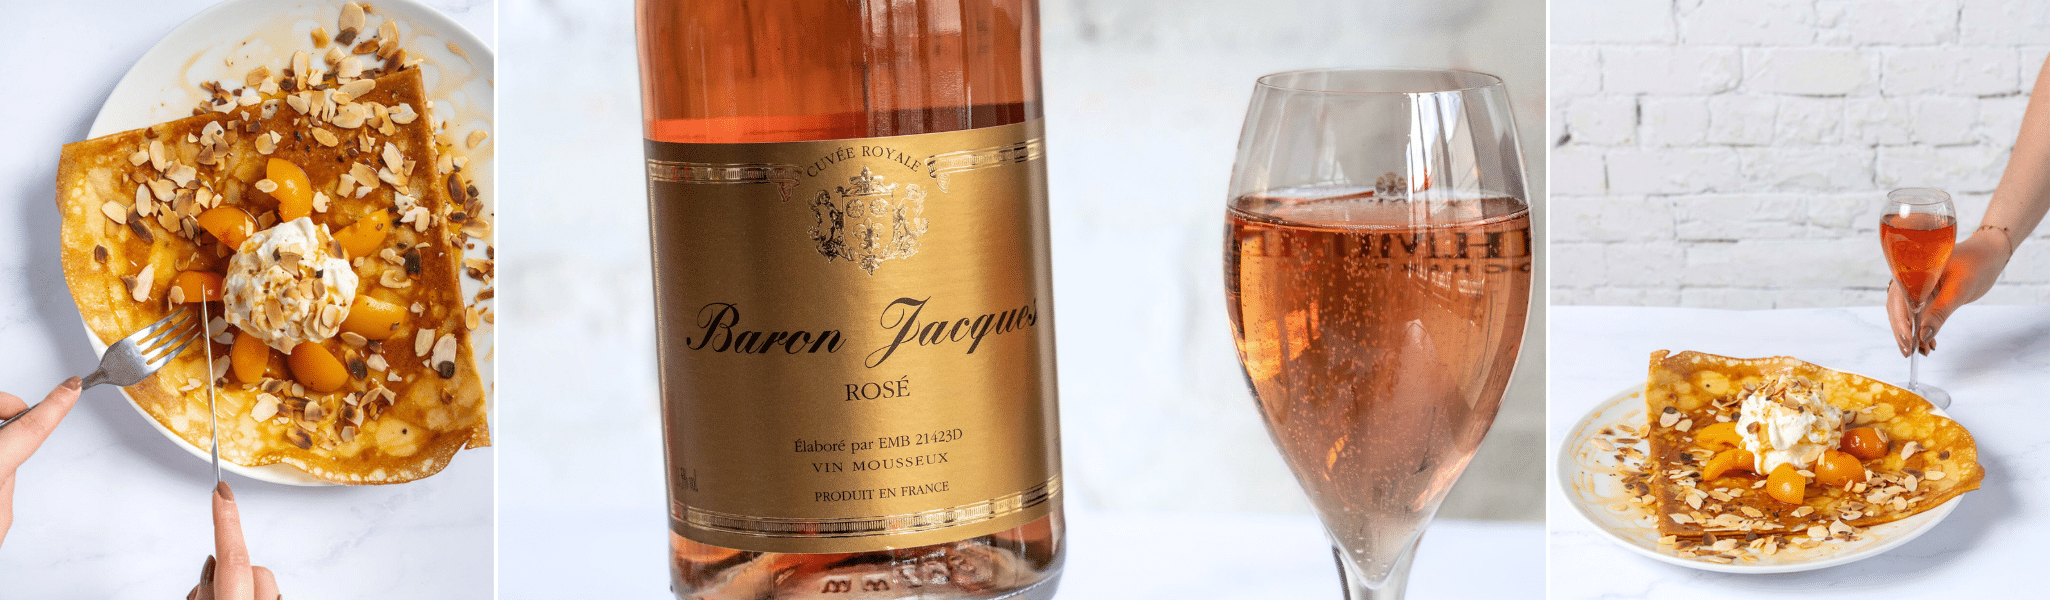 Four Frogs Crêperie - November wine of the month - Baron jacques sparkling rose